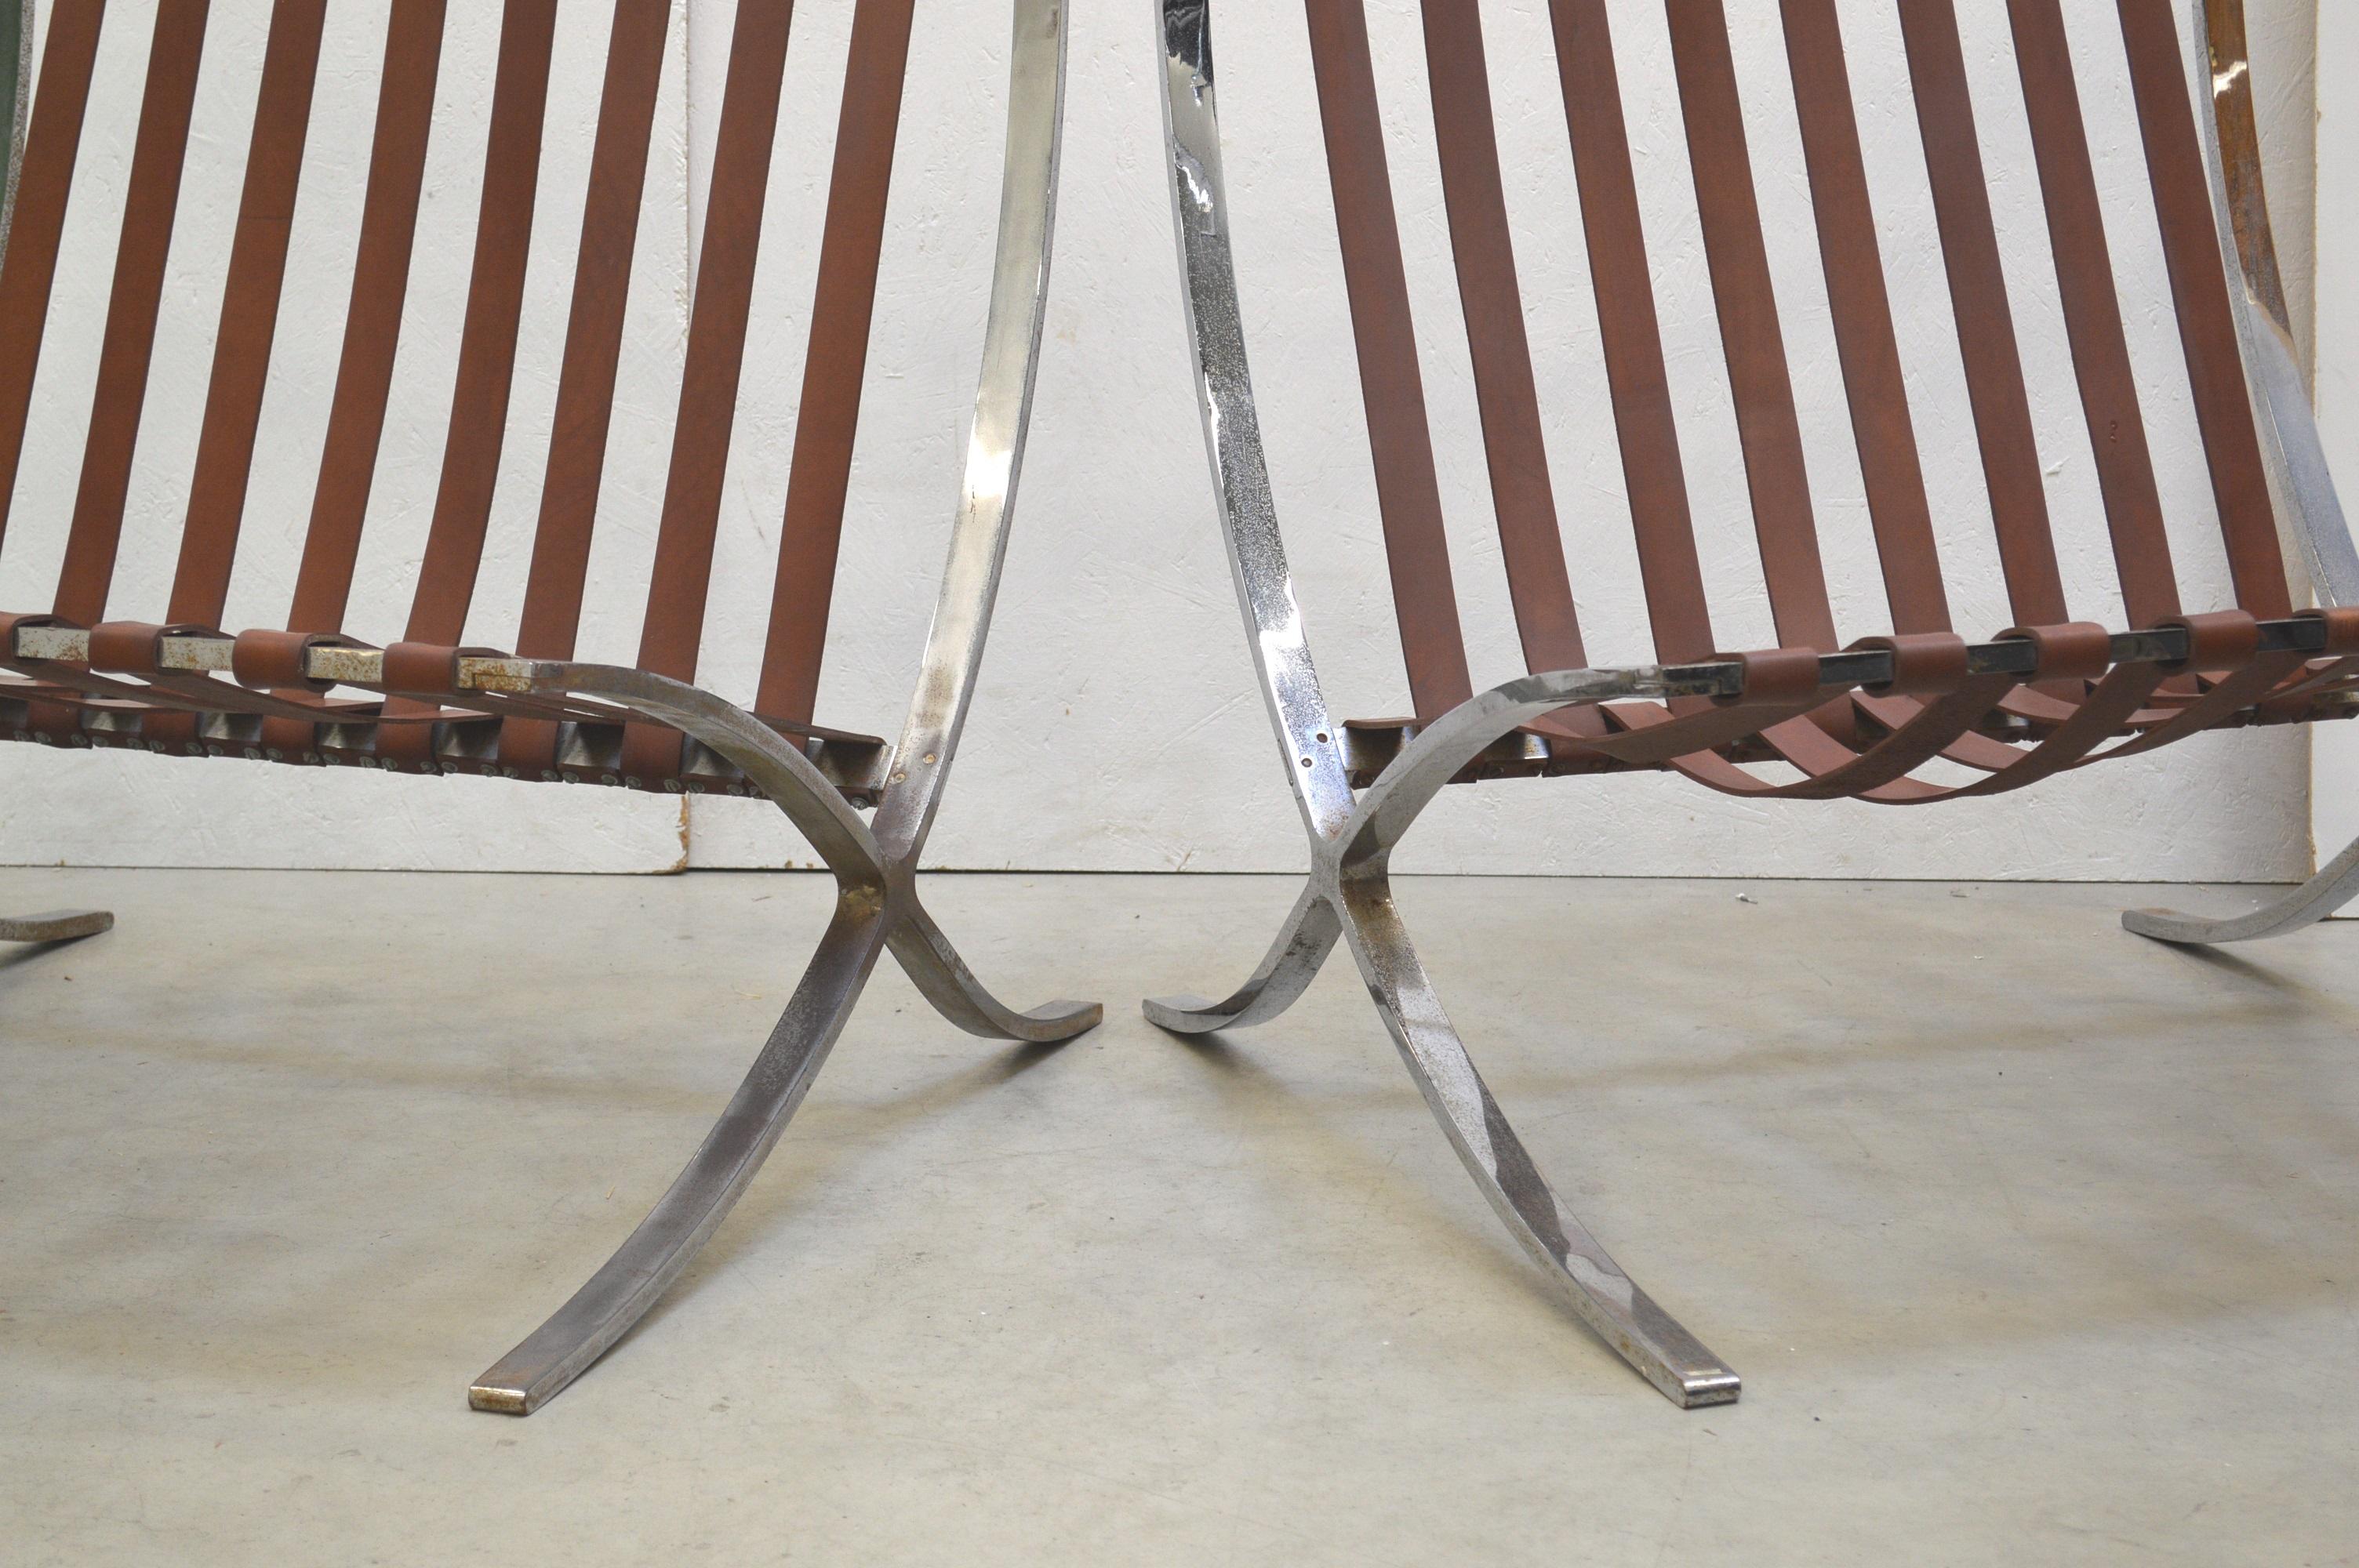 German Pair of Early Barcelona Chair by Mies Van Der Rohe by Stiegler 1950s For Sale